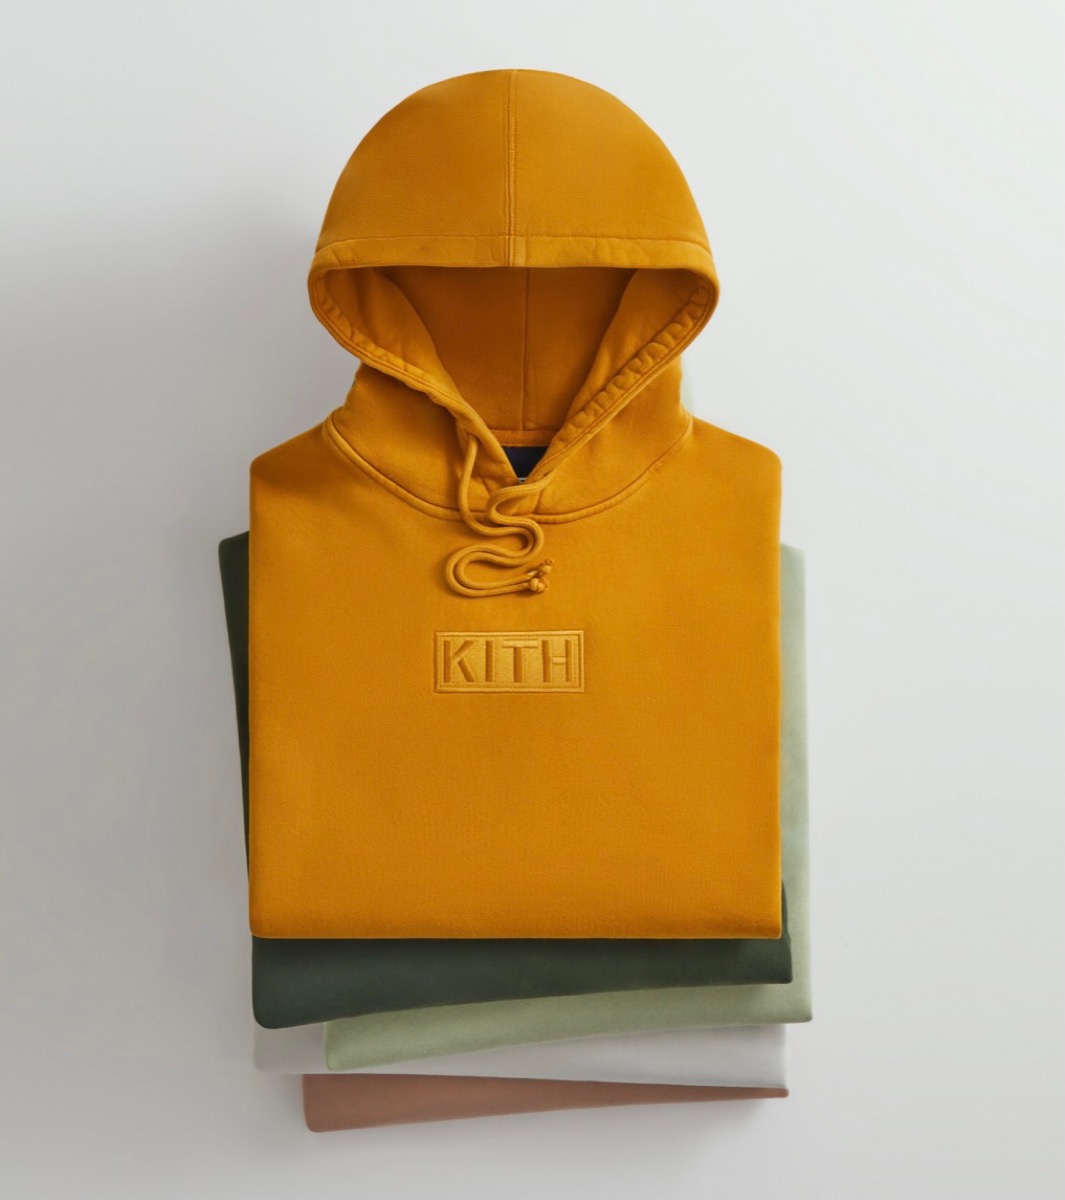 Kith “Cyber Monday ”が国内月日に発売   UP TO DATE